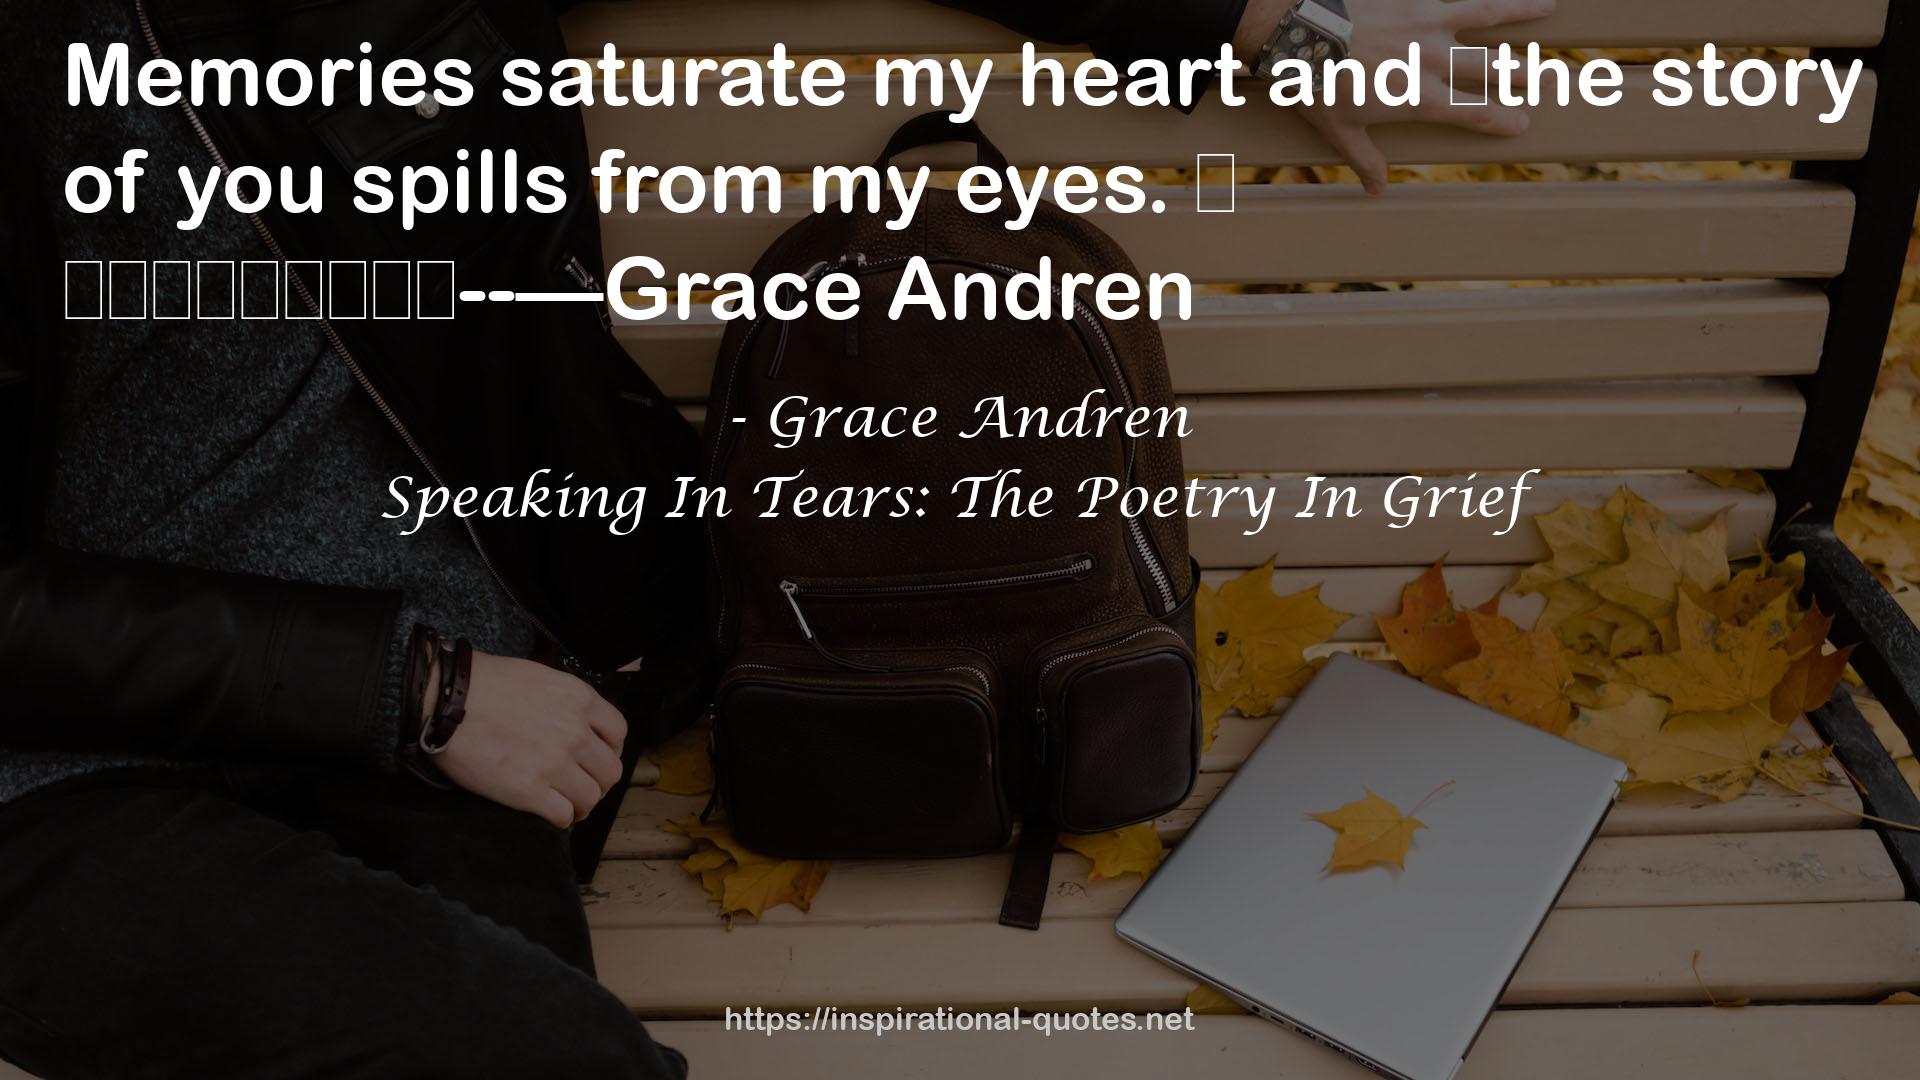 Speaking In Tears: The Poetry In Grief QUOTES